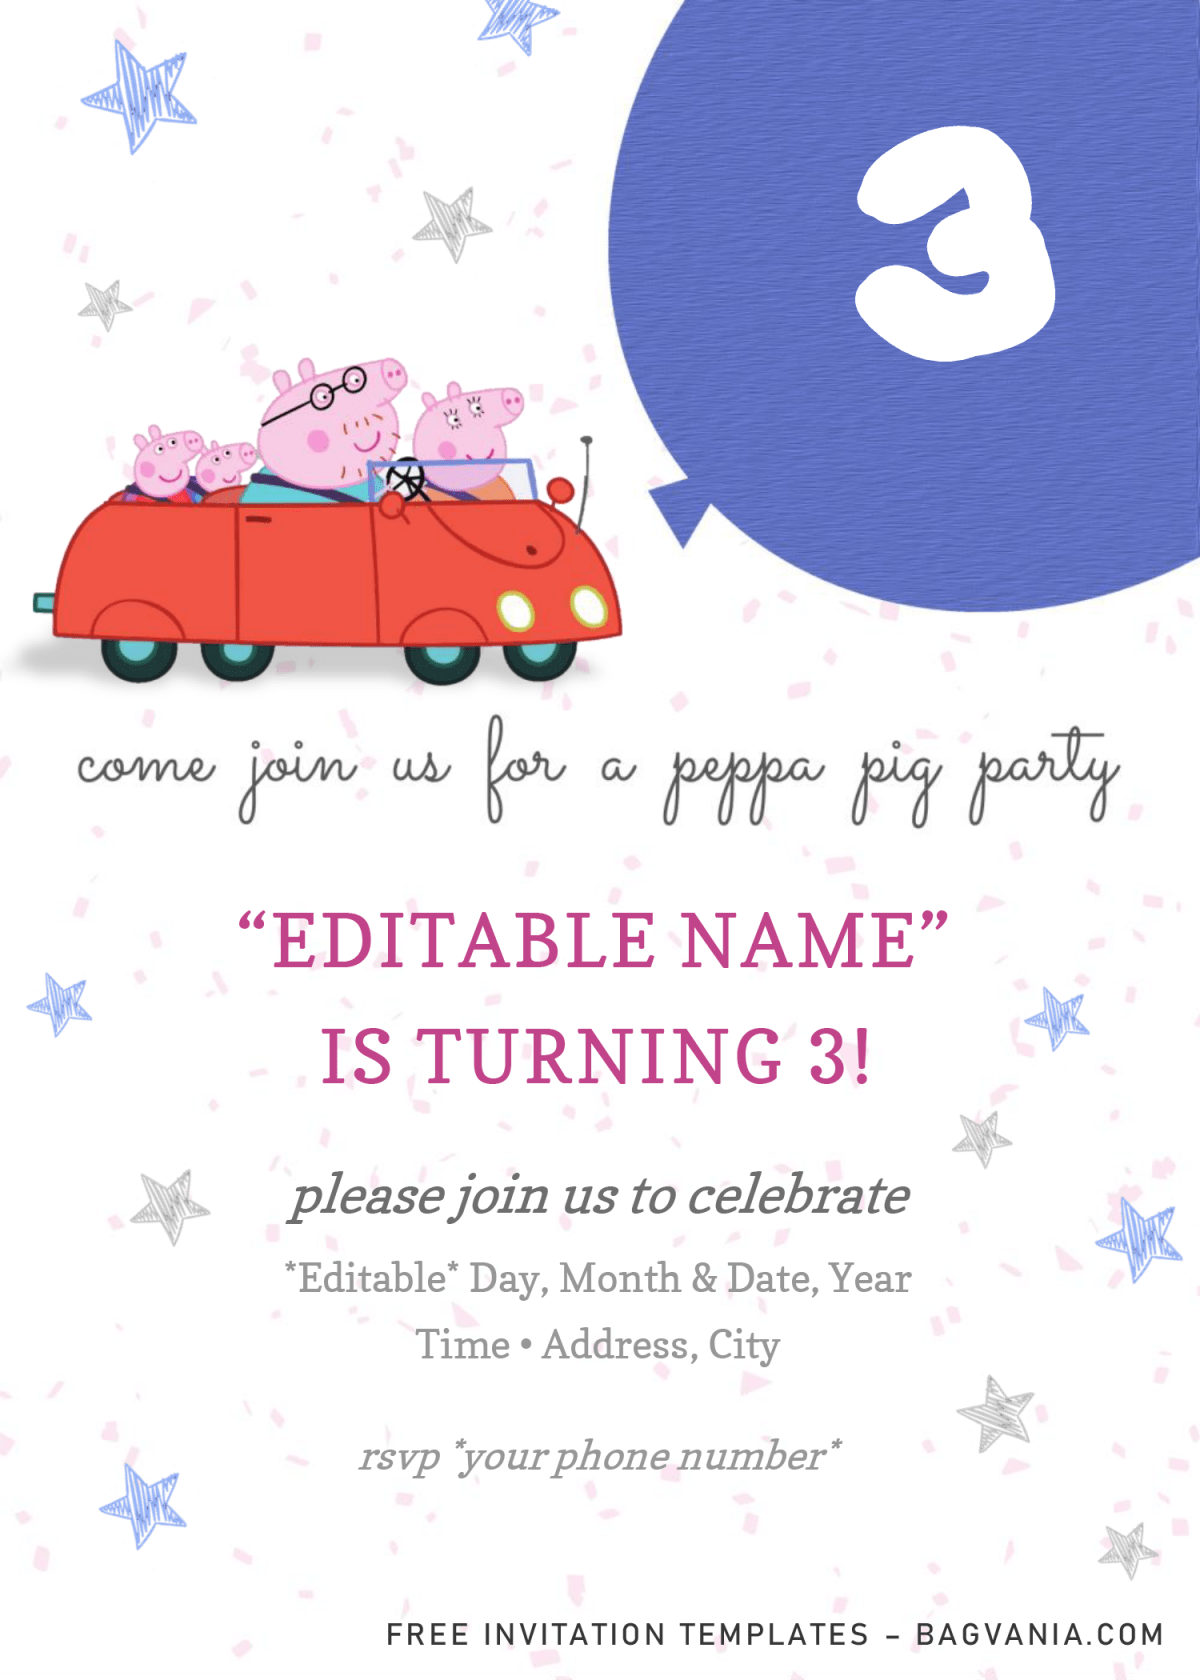 Peppa Pig Baby Shower Invitation Templates - Editable With Microsoft Word and has peppa and family riding vintage red car